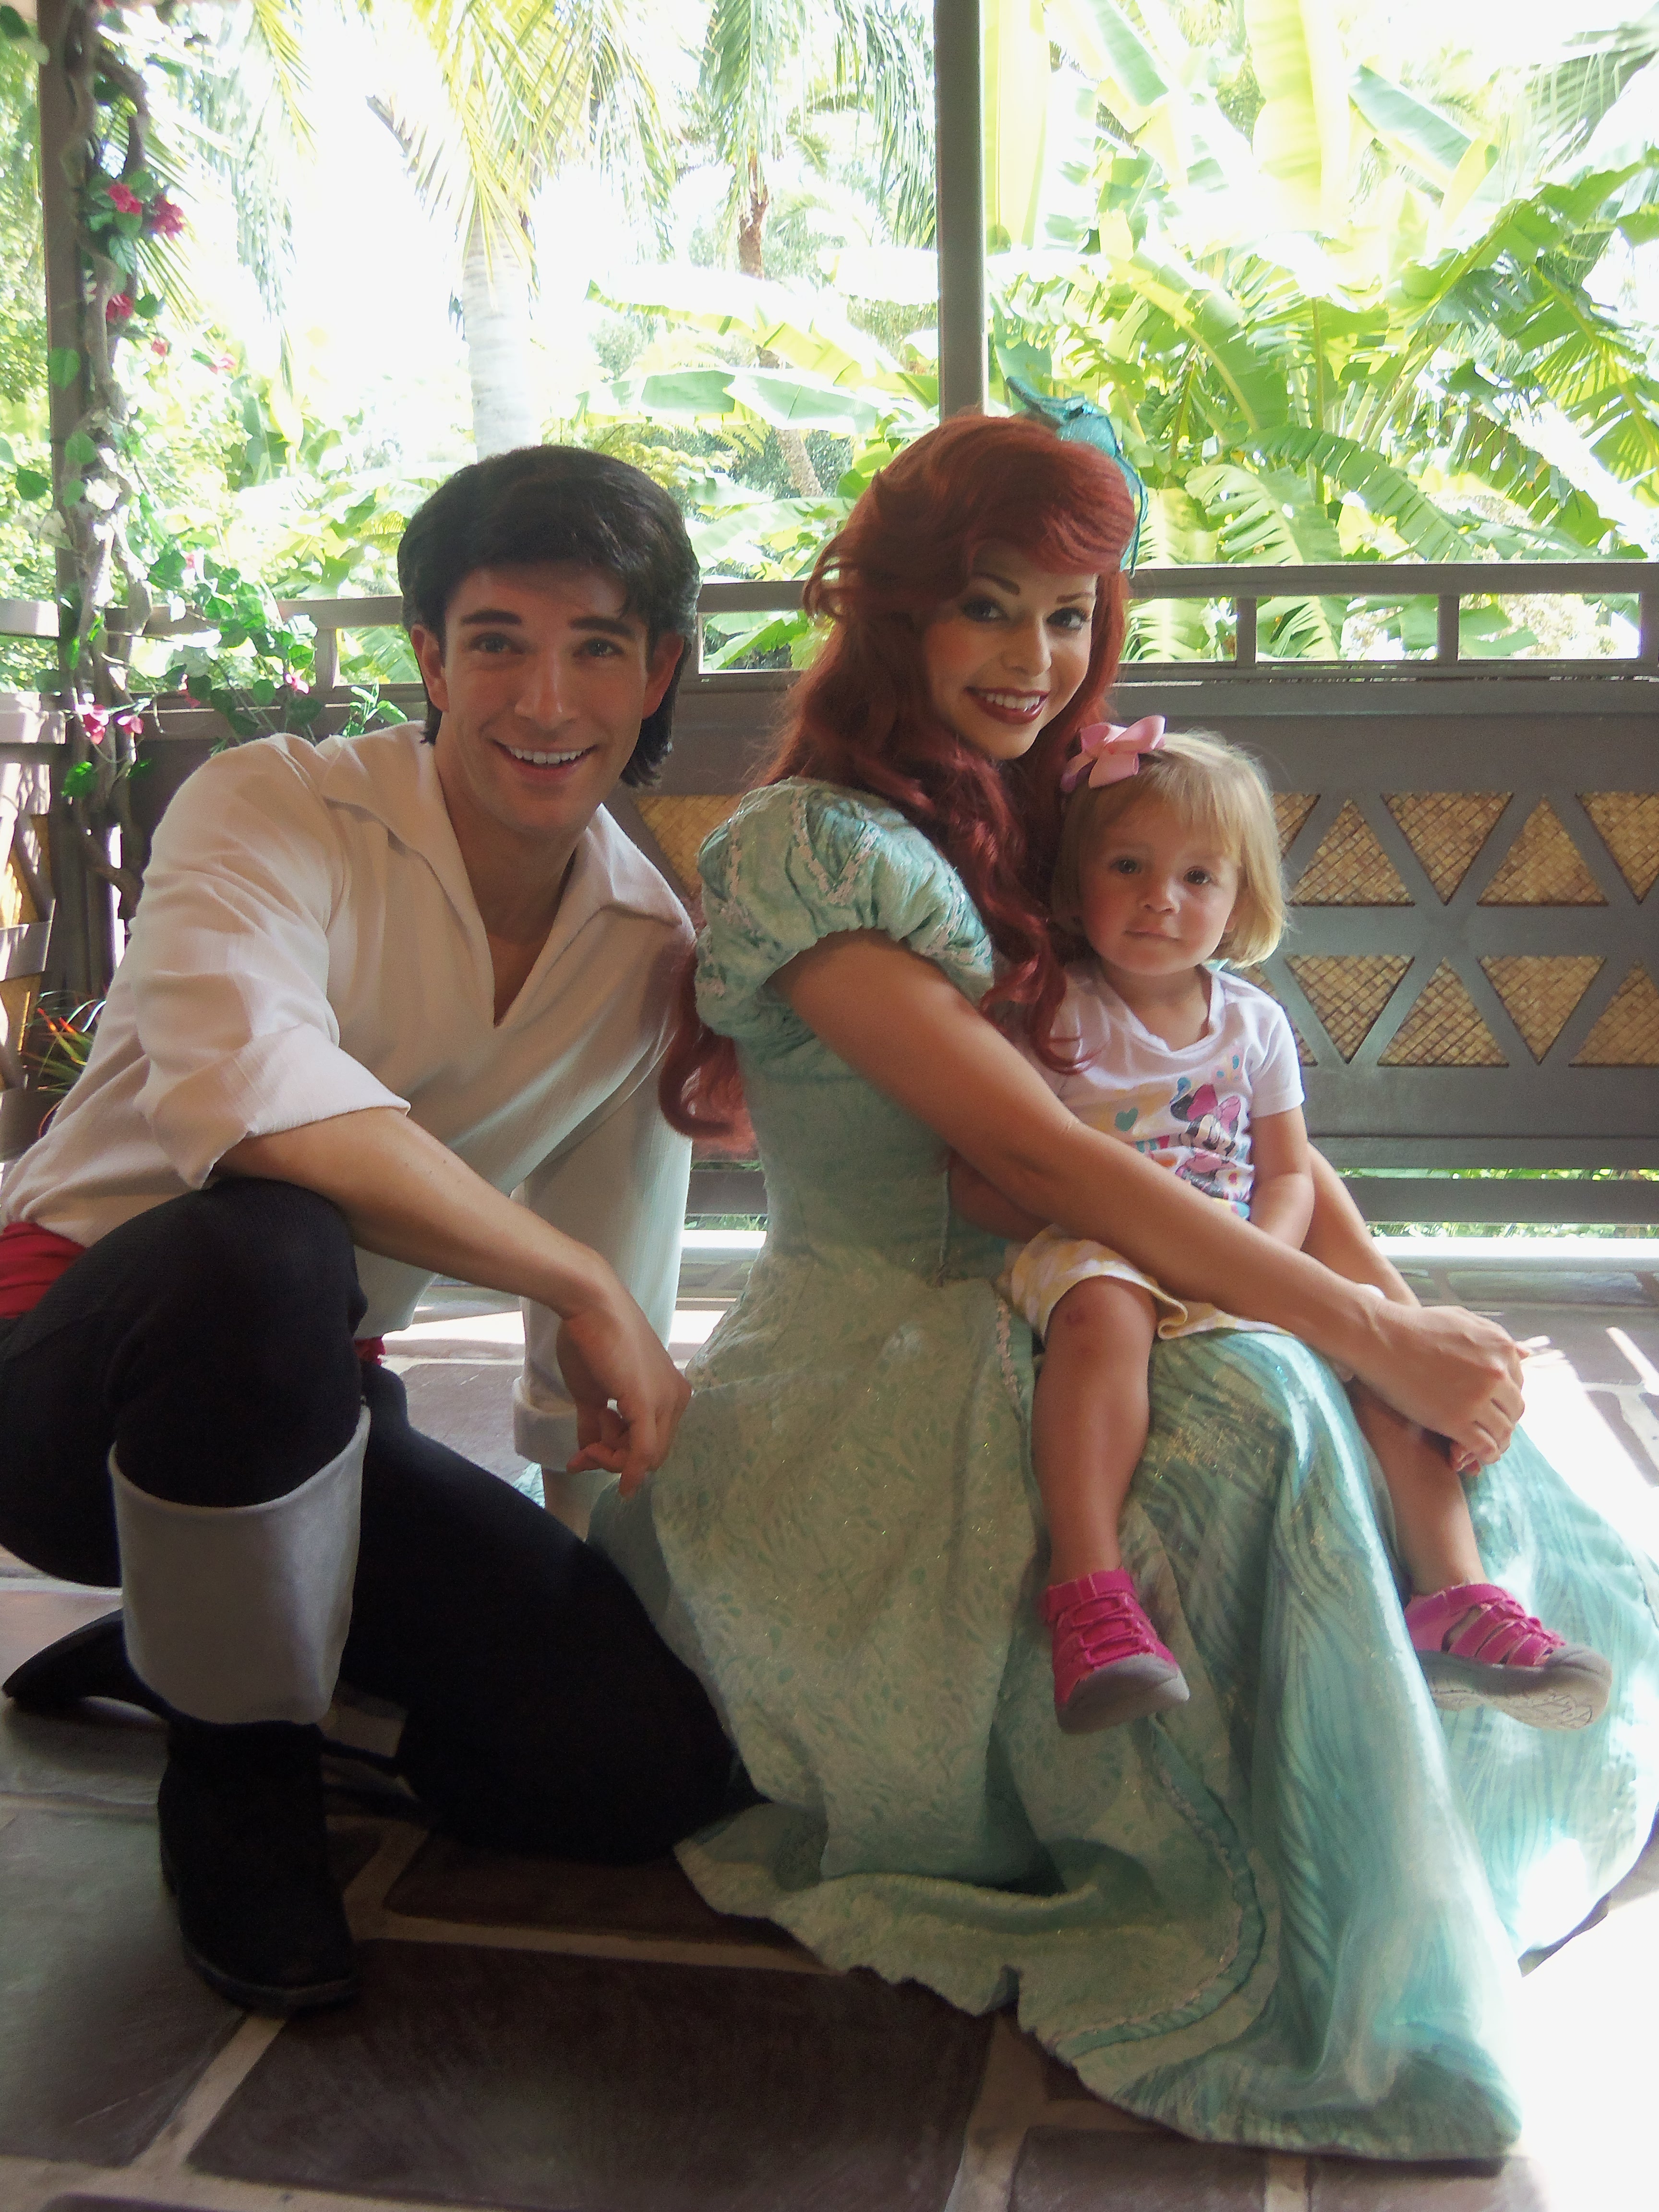 Ariel and Eric when they used to meet at the Adventureland Verandah.